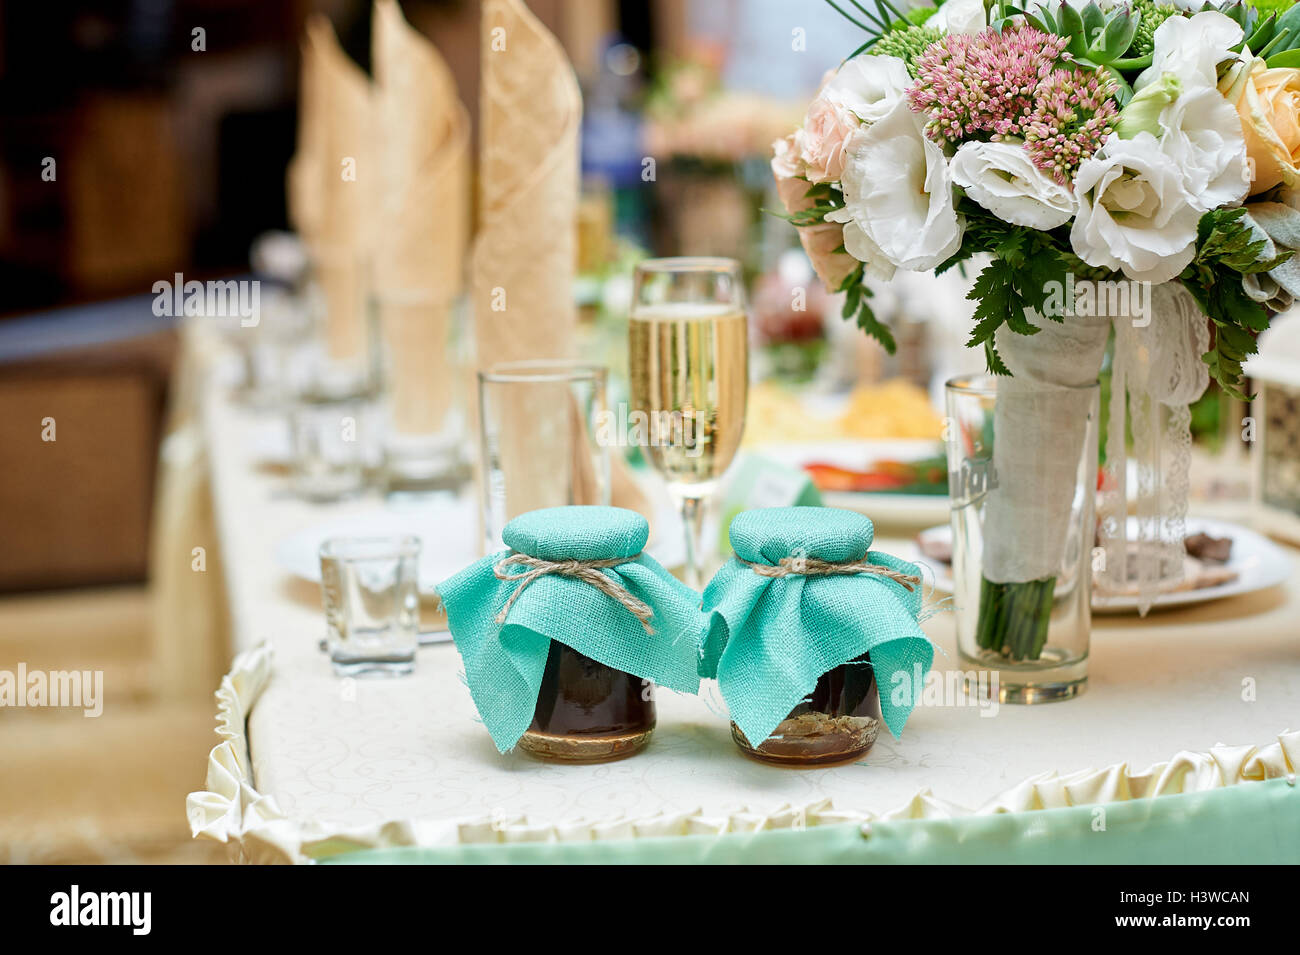 wedding table decorated with flowers in restaurant Stock Photo